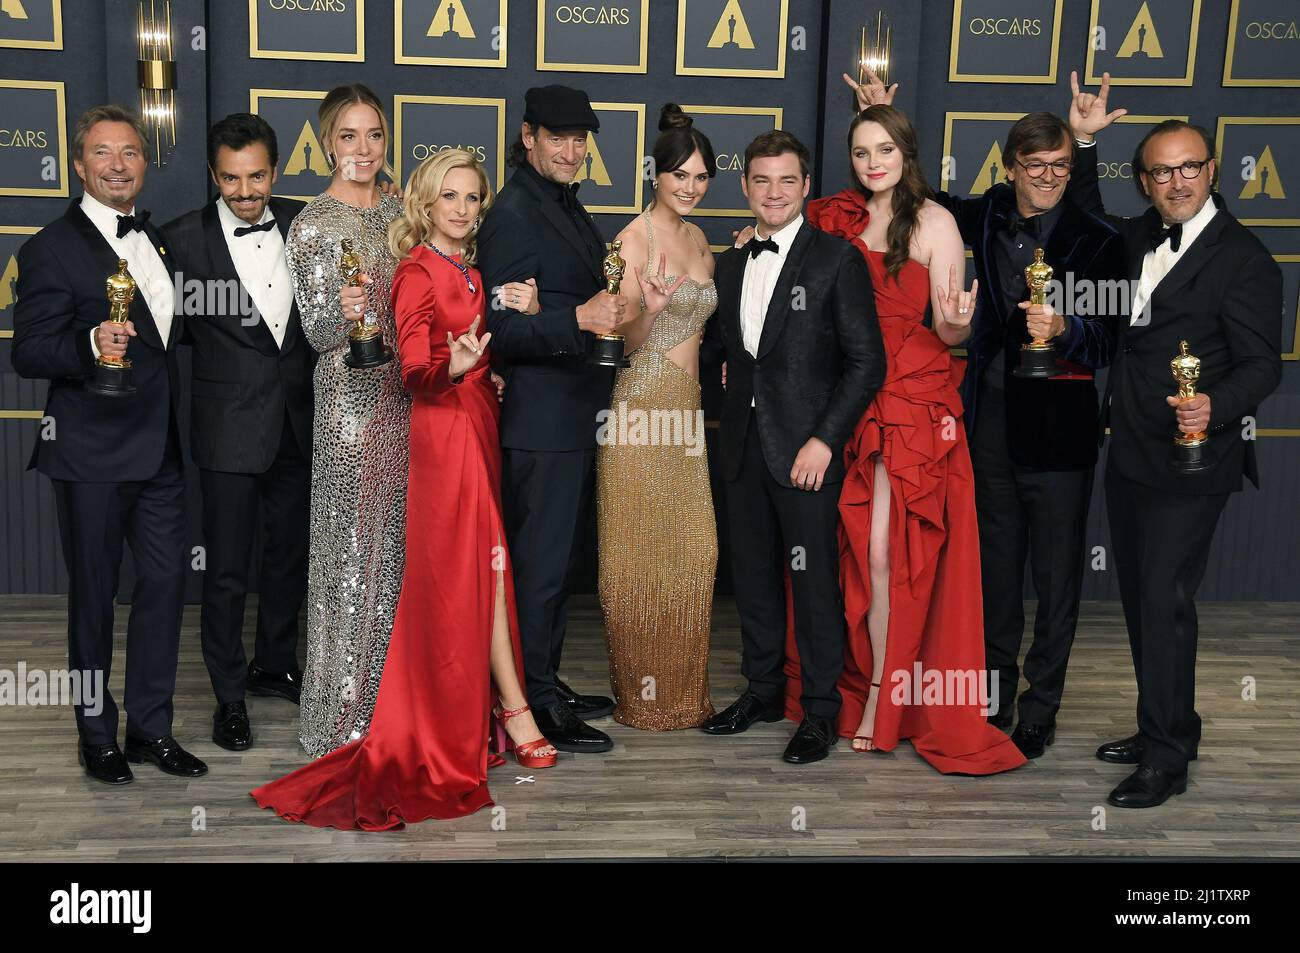 (L-R) Patrick Wachsberger, Eugenio Derbez, Sian Heder, Marlee Matlin, Troy Kotsur, Emilia Jones, Daniel Durant, Amy Forsyth, Philippe Rousselet, and Fabrice Gianfermi, winners of the Best Picture award for ‘CODA’,  posing on stage in the press room at the 94th Academy Awards held at the Dolby Theatre in Hollywood, CA on Sundayday, ?March 27, 2022. (Photo By Sthanlee B. Mirador/Sipa USA) Stock Photo